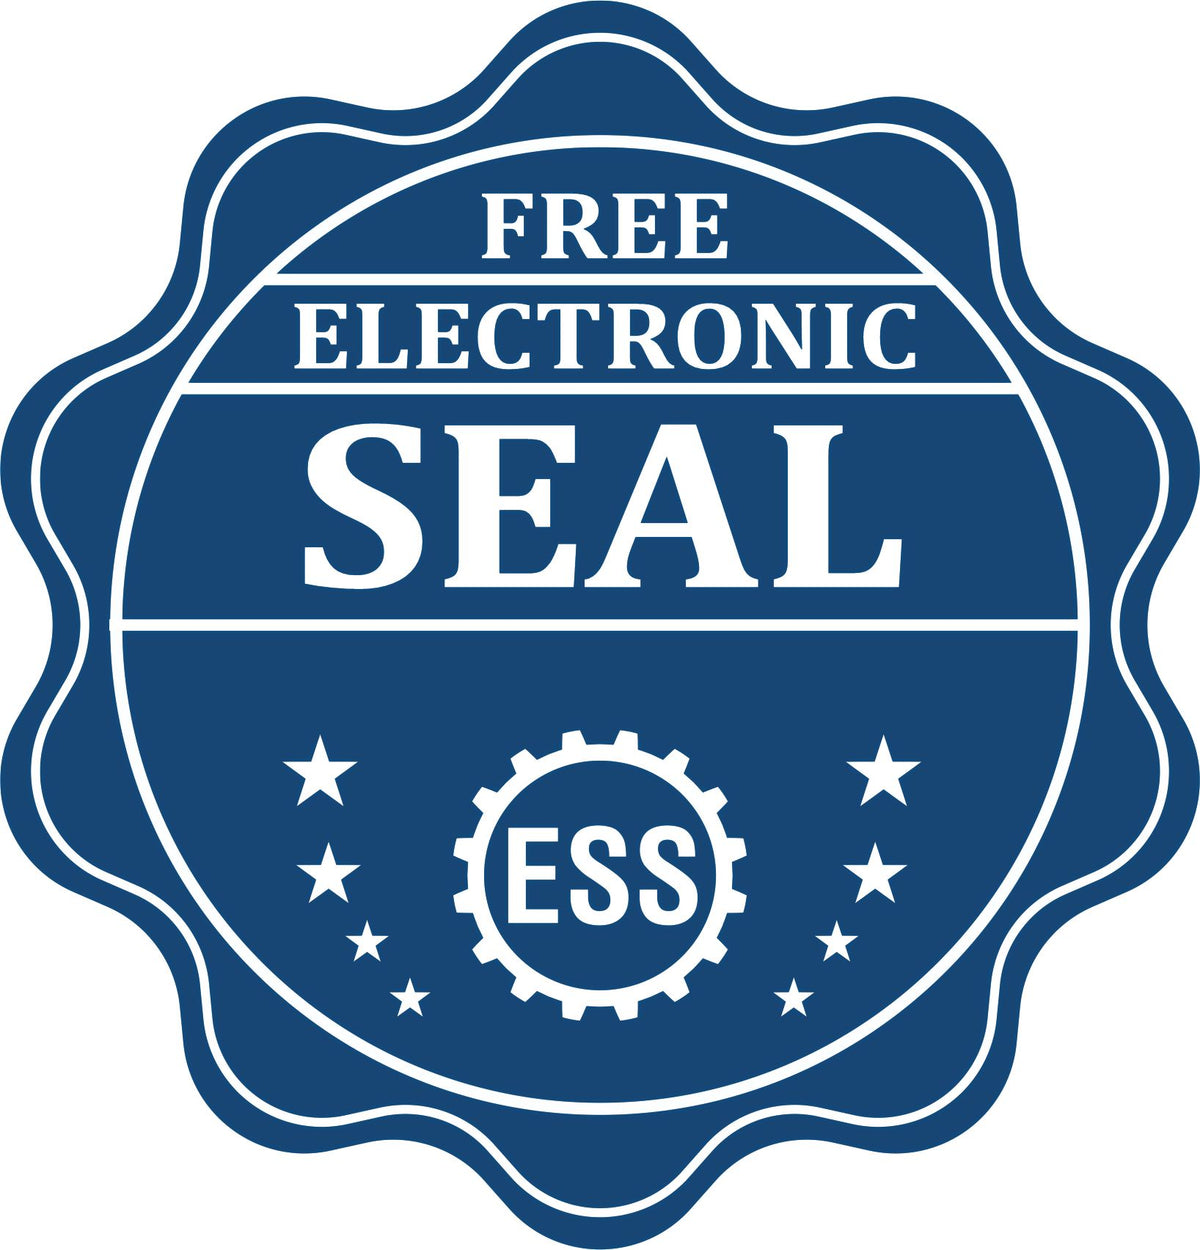 A badge showing a free electronic seal for the Slim Pre-Inked Florida Landscape Architect Seal Stamp with stars and the ESS gear on the emblem.